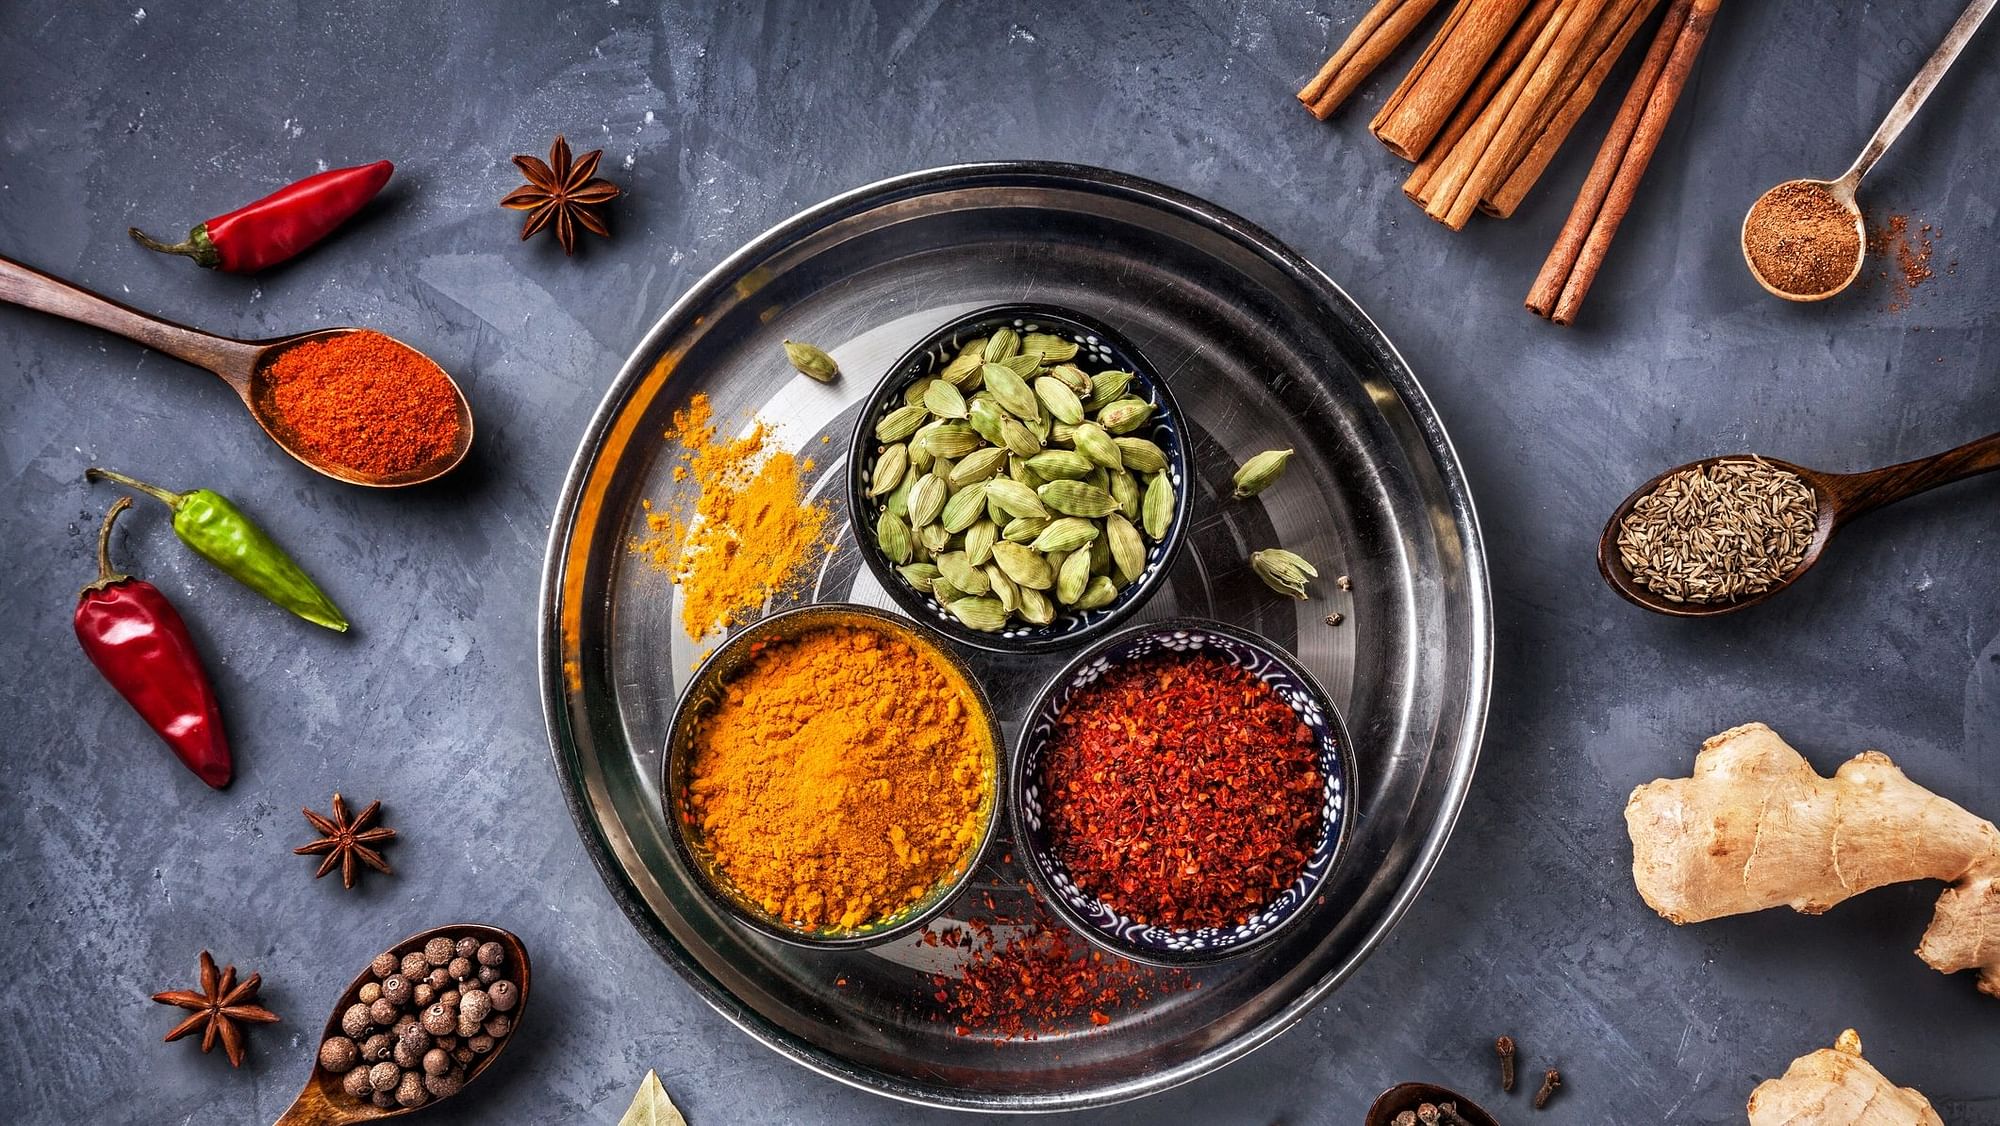 How do you apply Ayurveda principles to your cooking? 